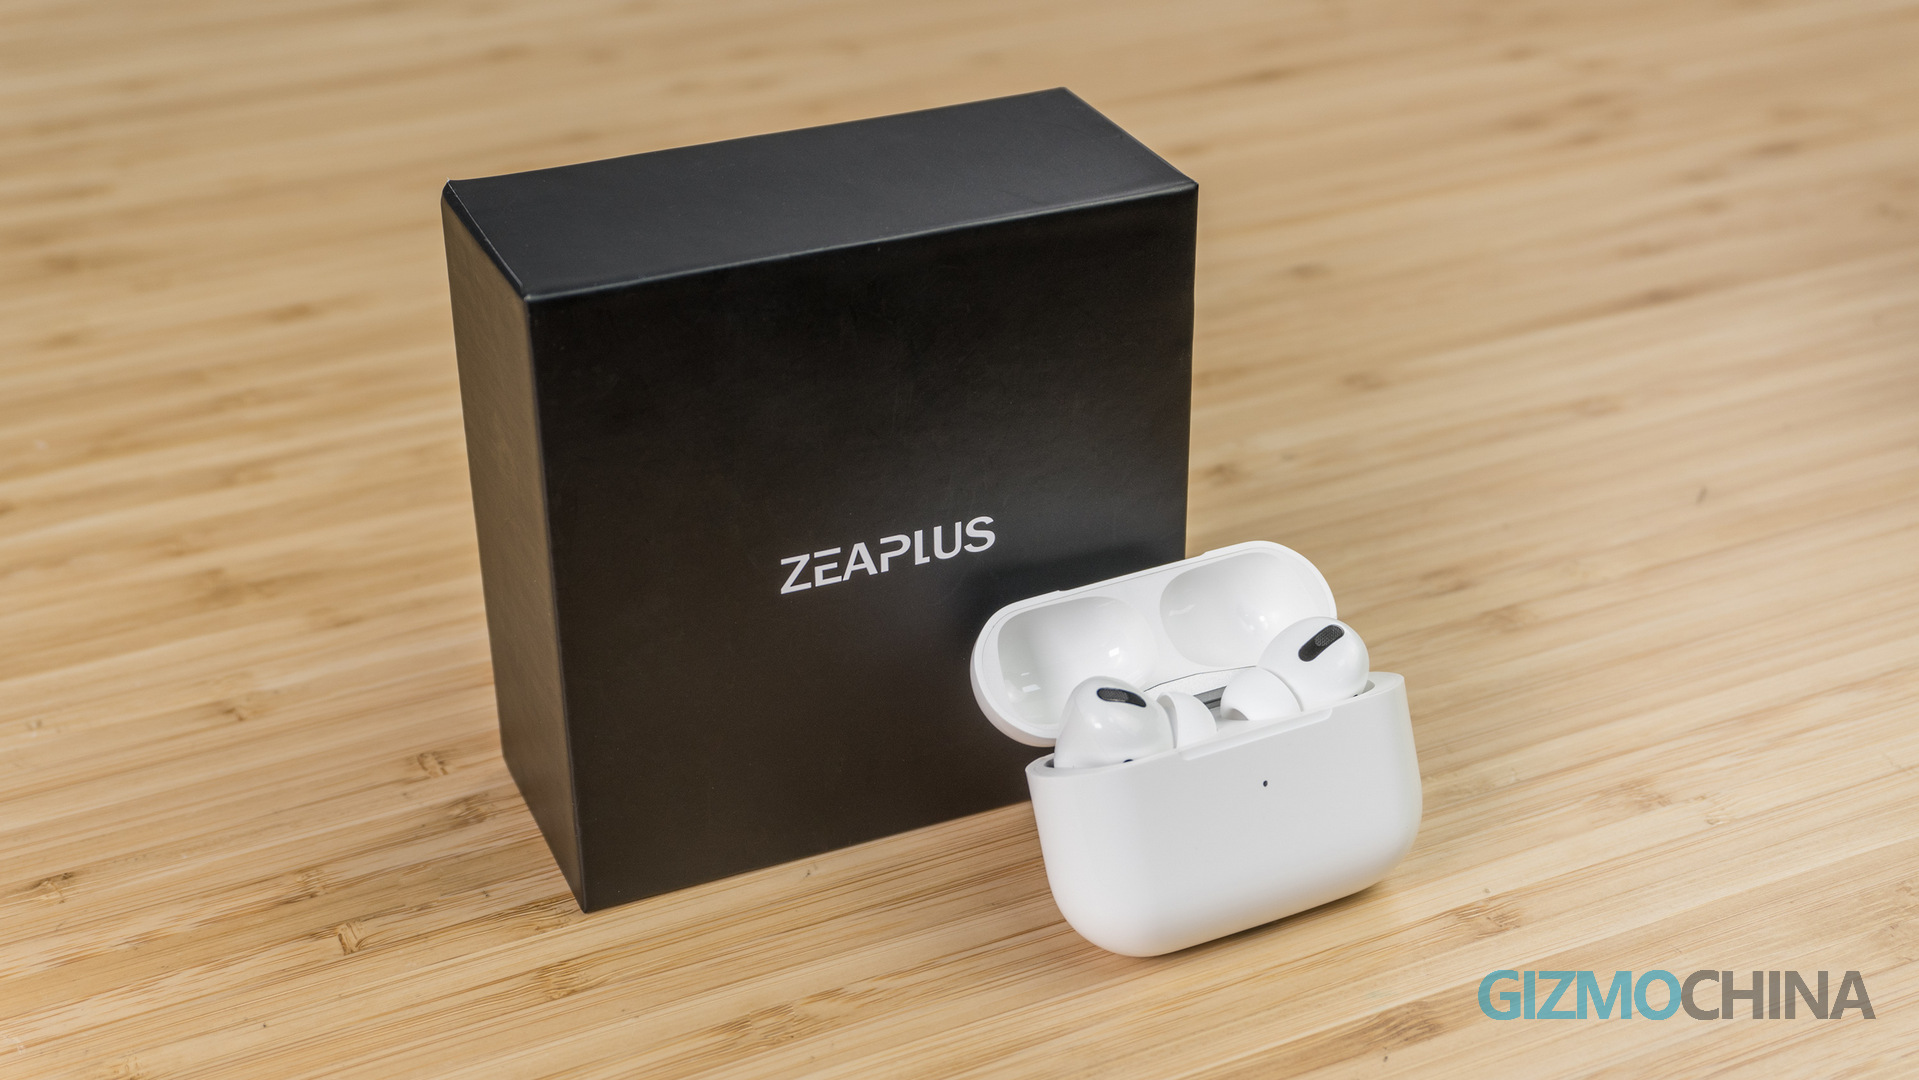 Zeaplus Buds is a $25 AirPods Pro clone with Active Noise Cancellation - Gizmochina